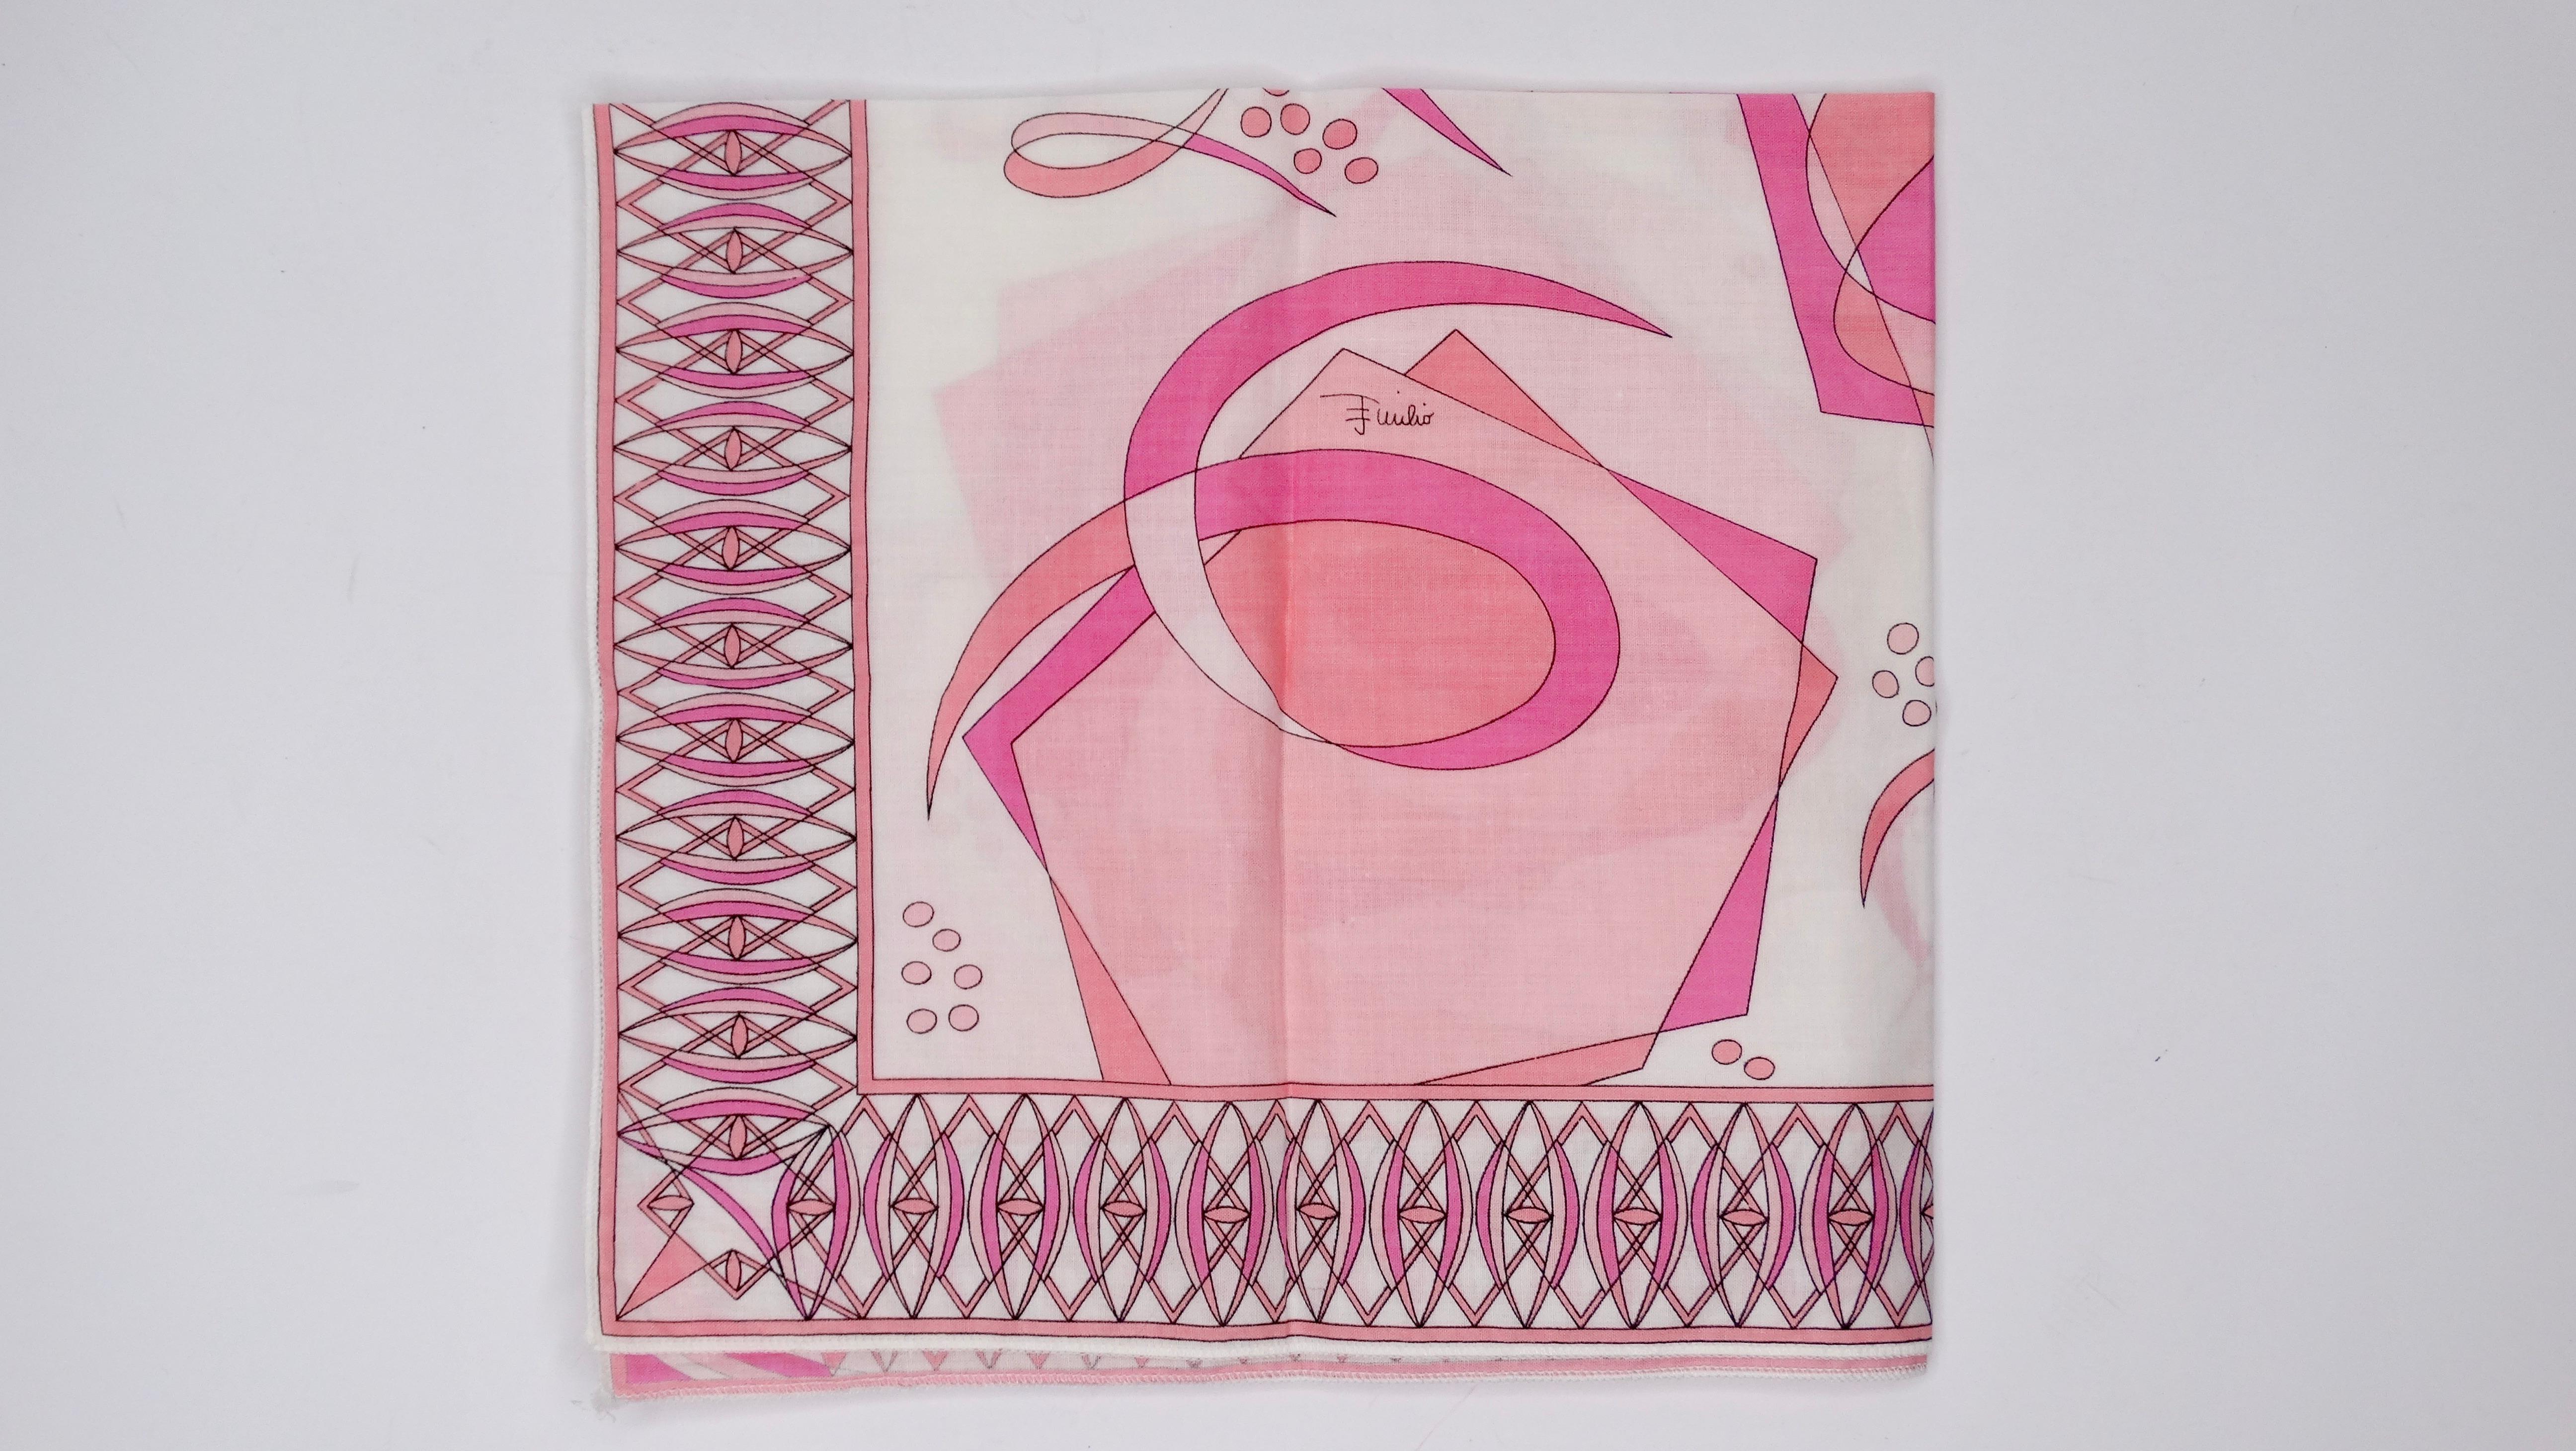 Add this Pucci to your collection! Circa 1960s, this adorable cotton scarf features one of Pucci's signature abstract geometric designs with shades of pink. Emilio Pucci written throughout, made in Italy. This piece is versatile! tie in your hair,